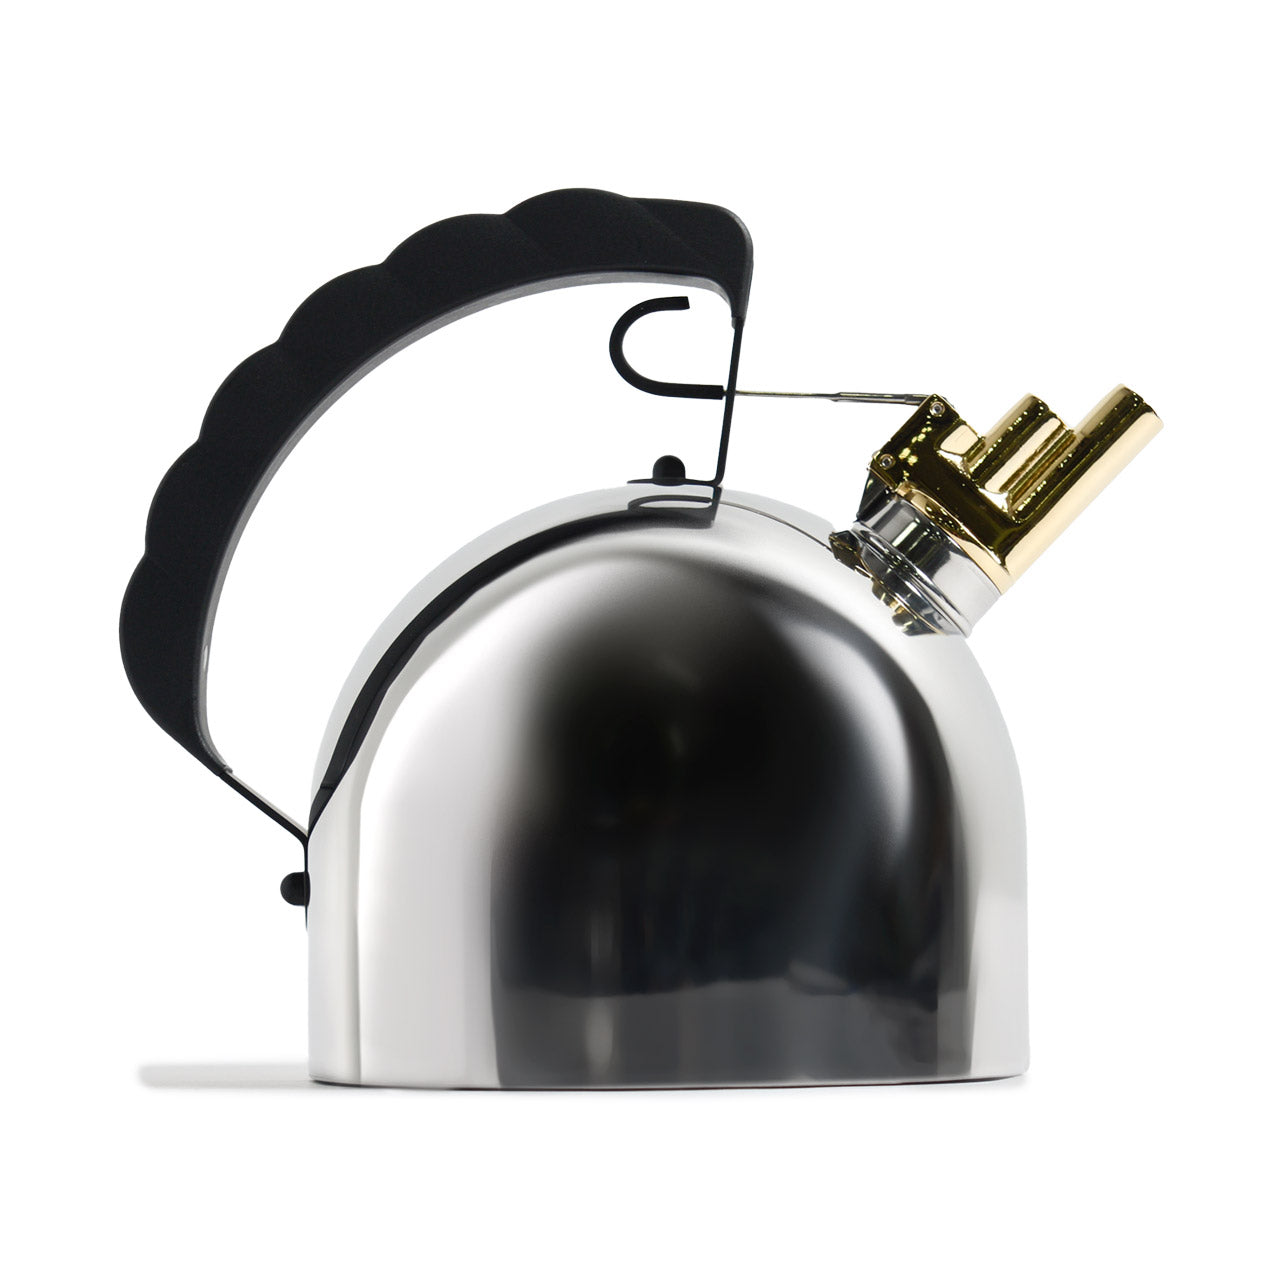 ALESSI ITALY Induction Tea kettle - household items - by owner